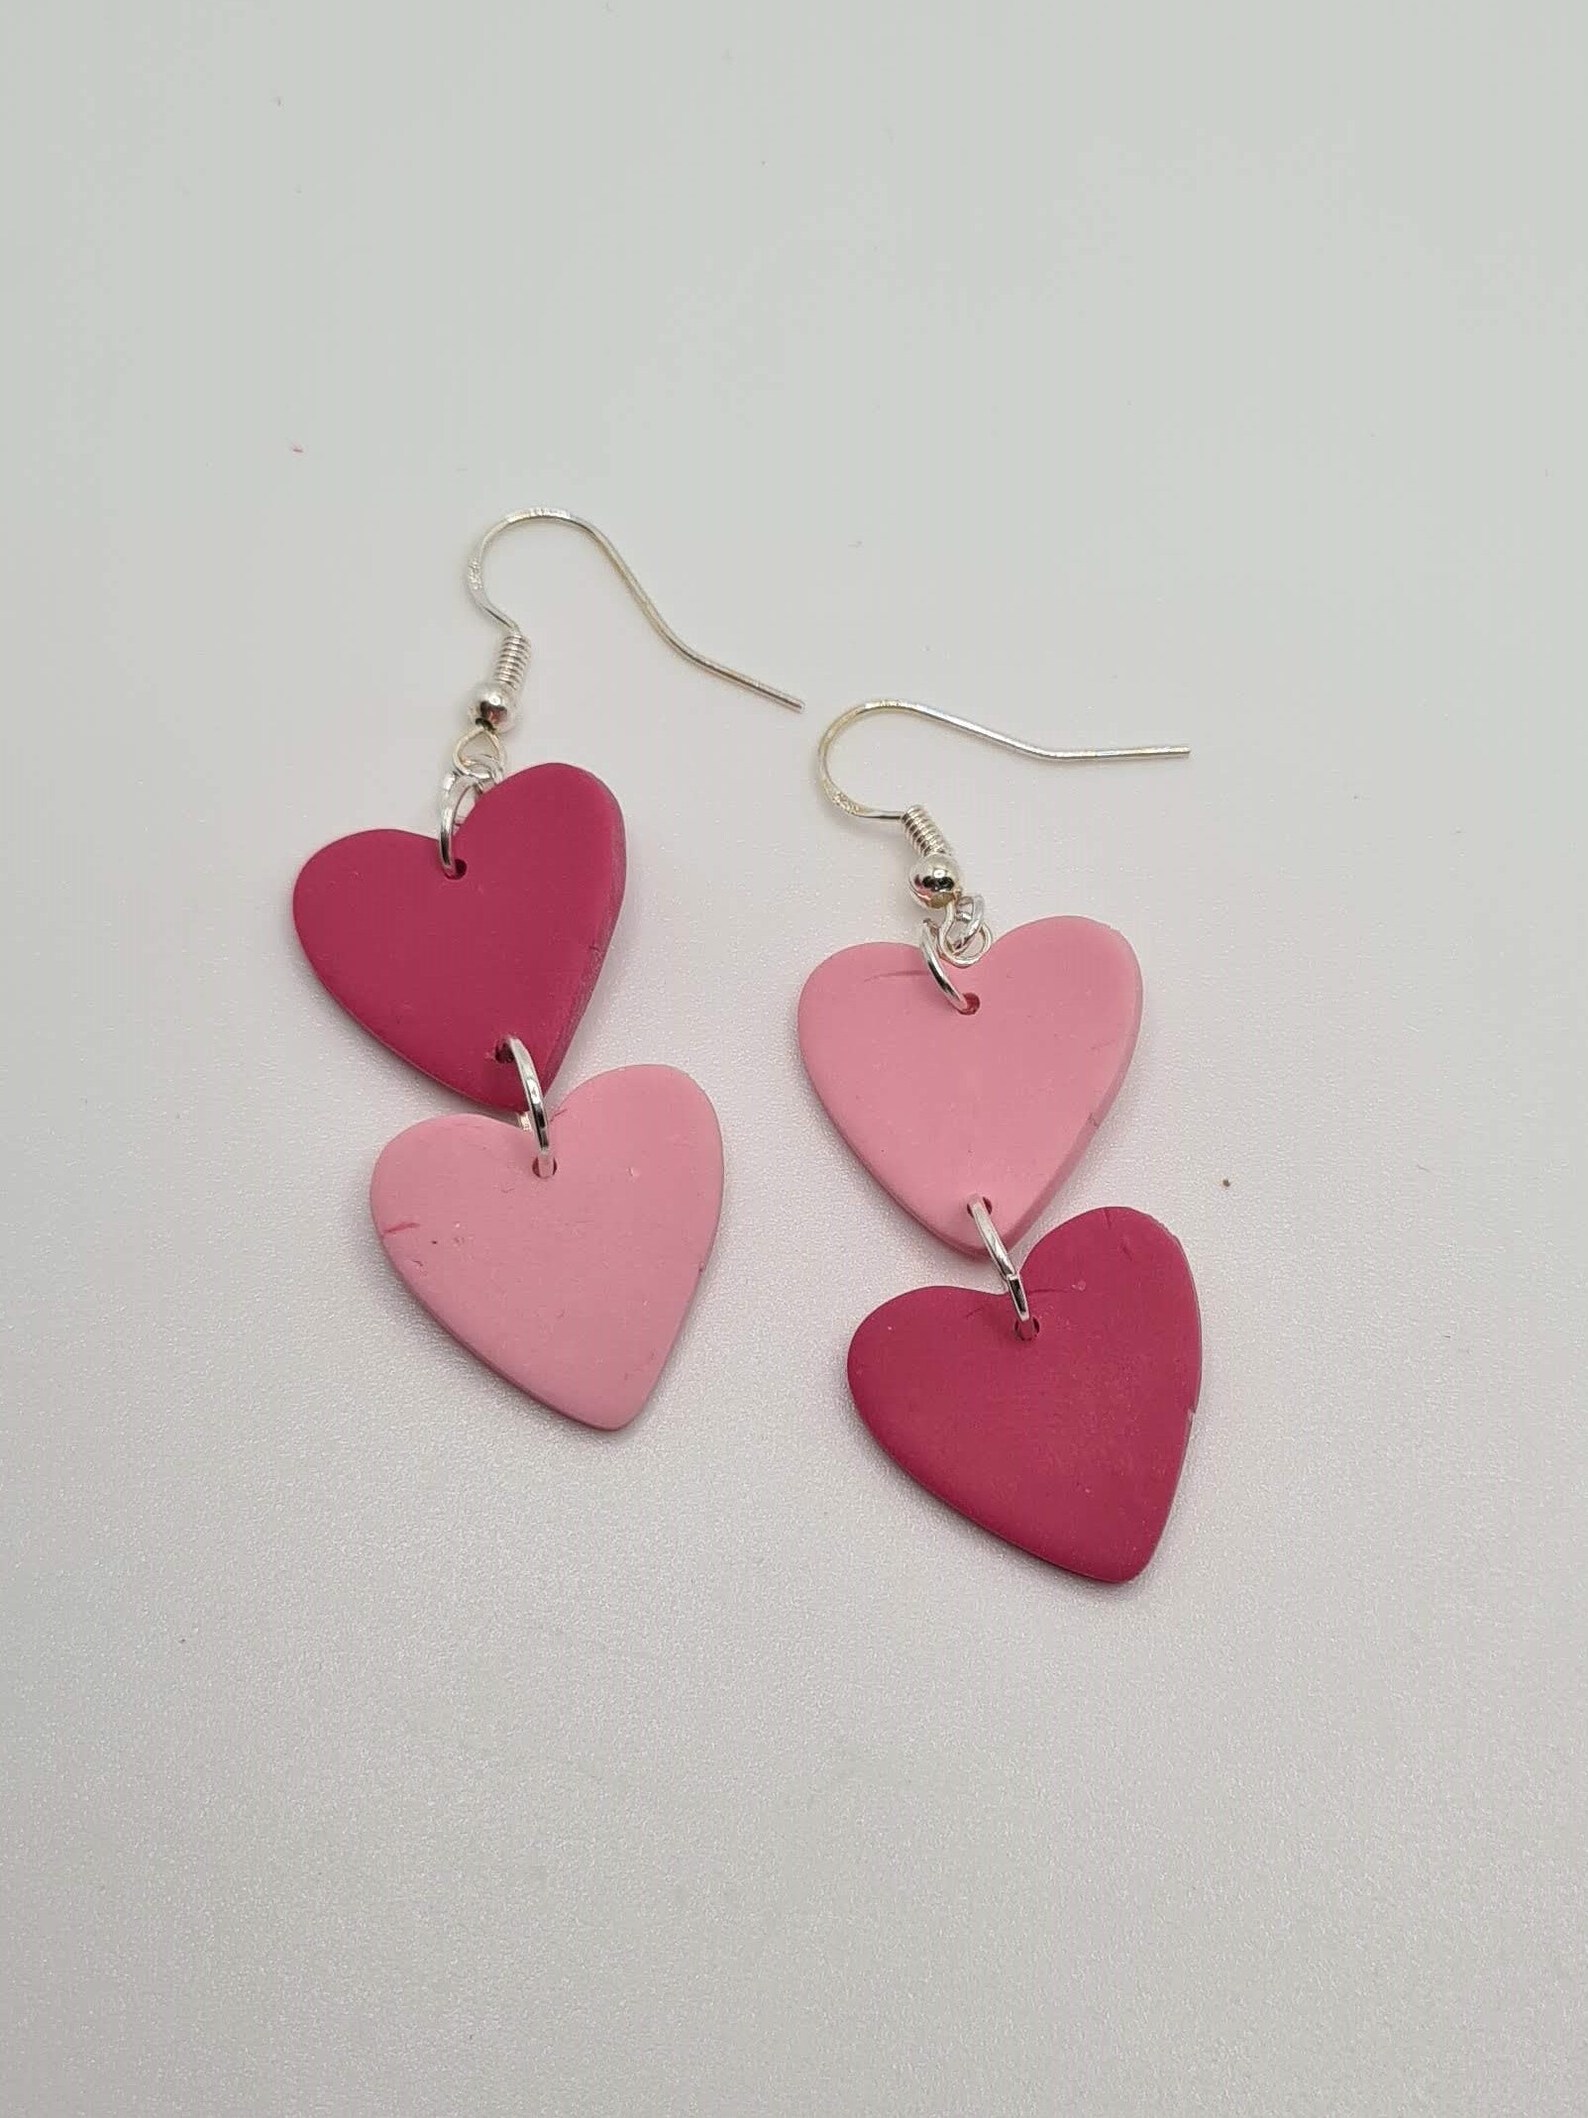 Polymer clay pink two tone heart earrings // handmade | Etsy